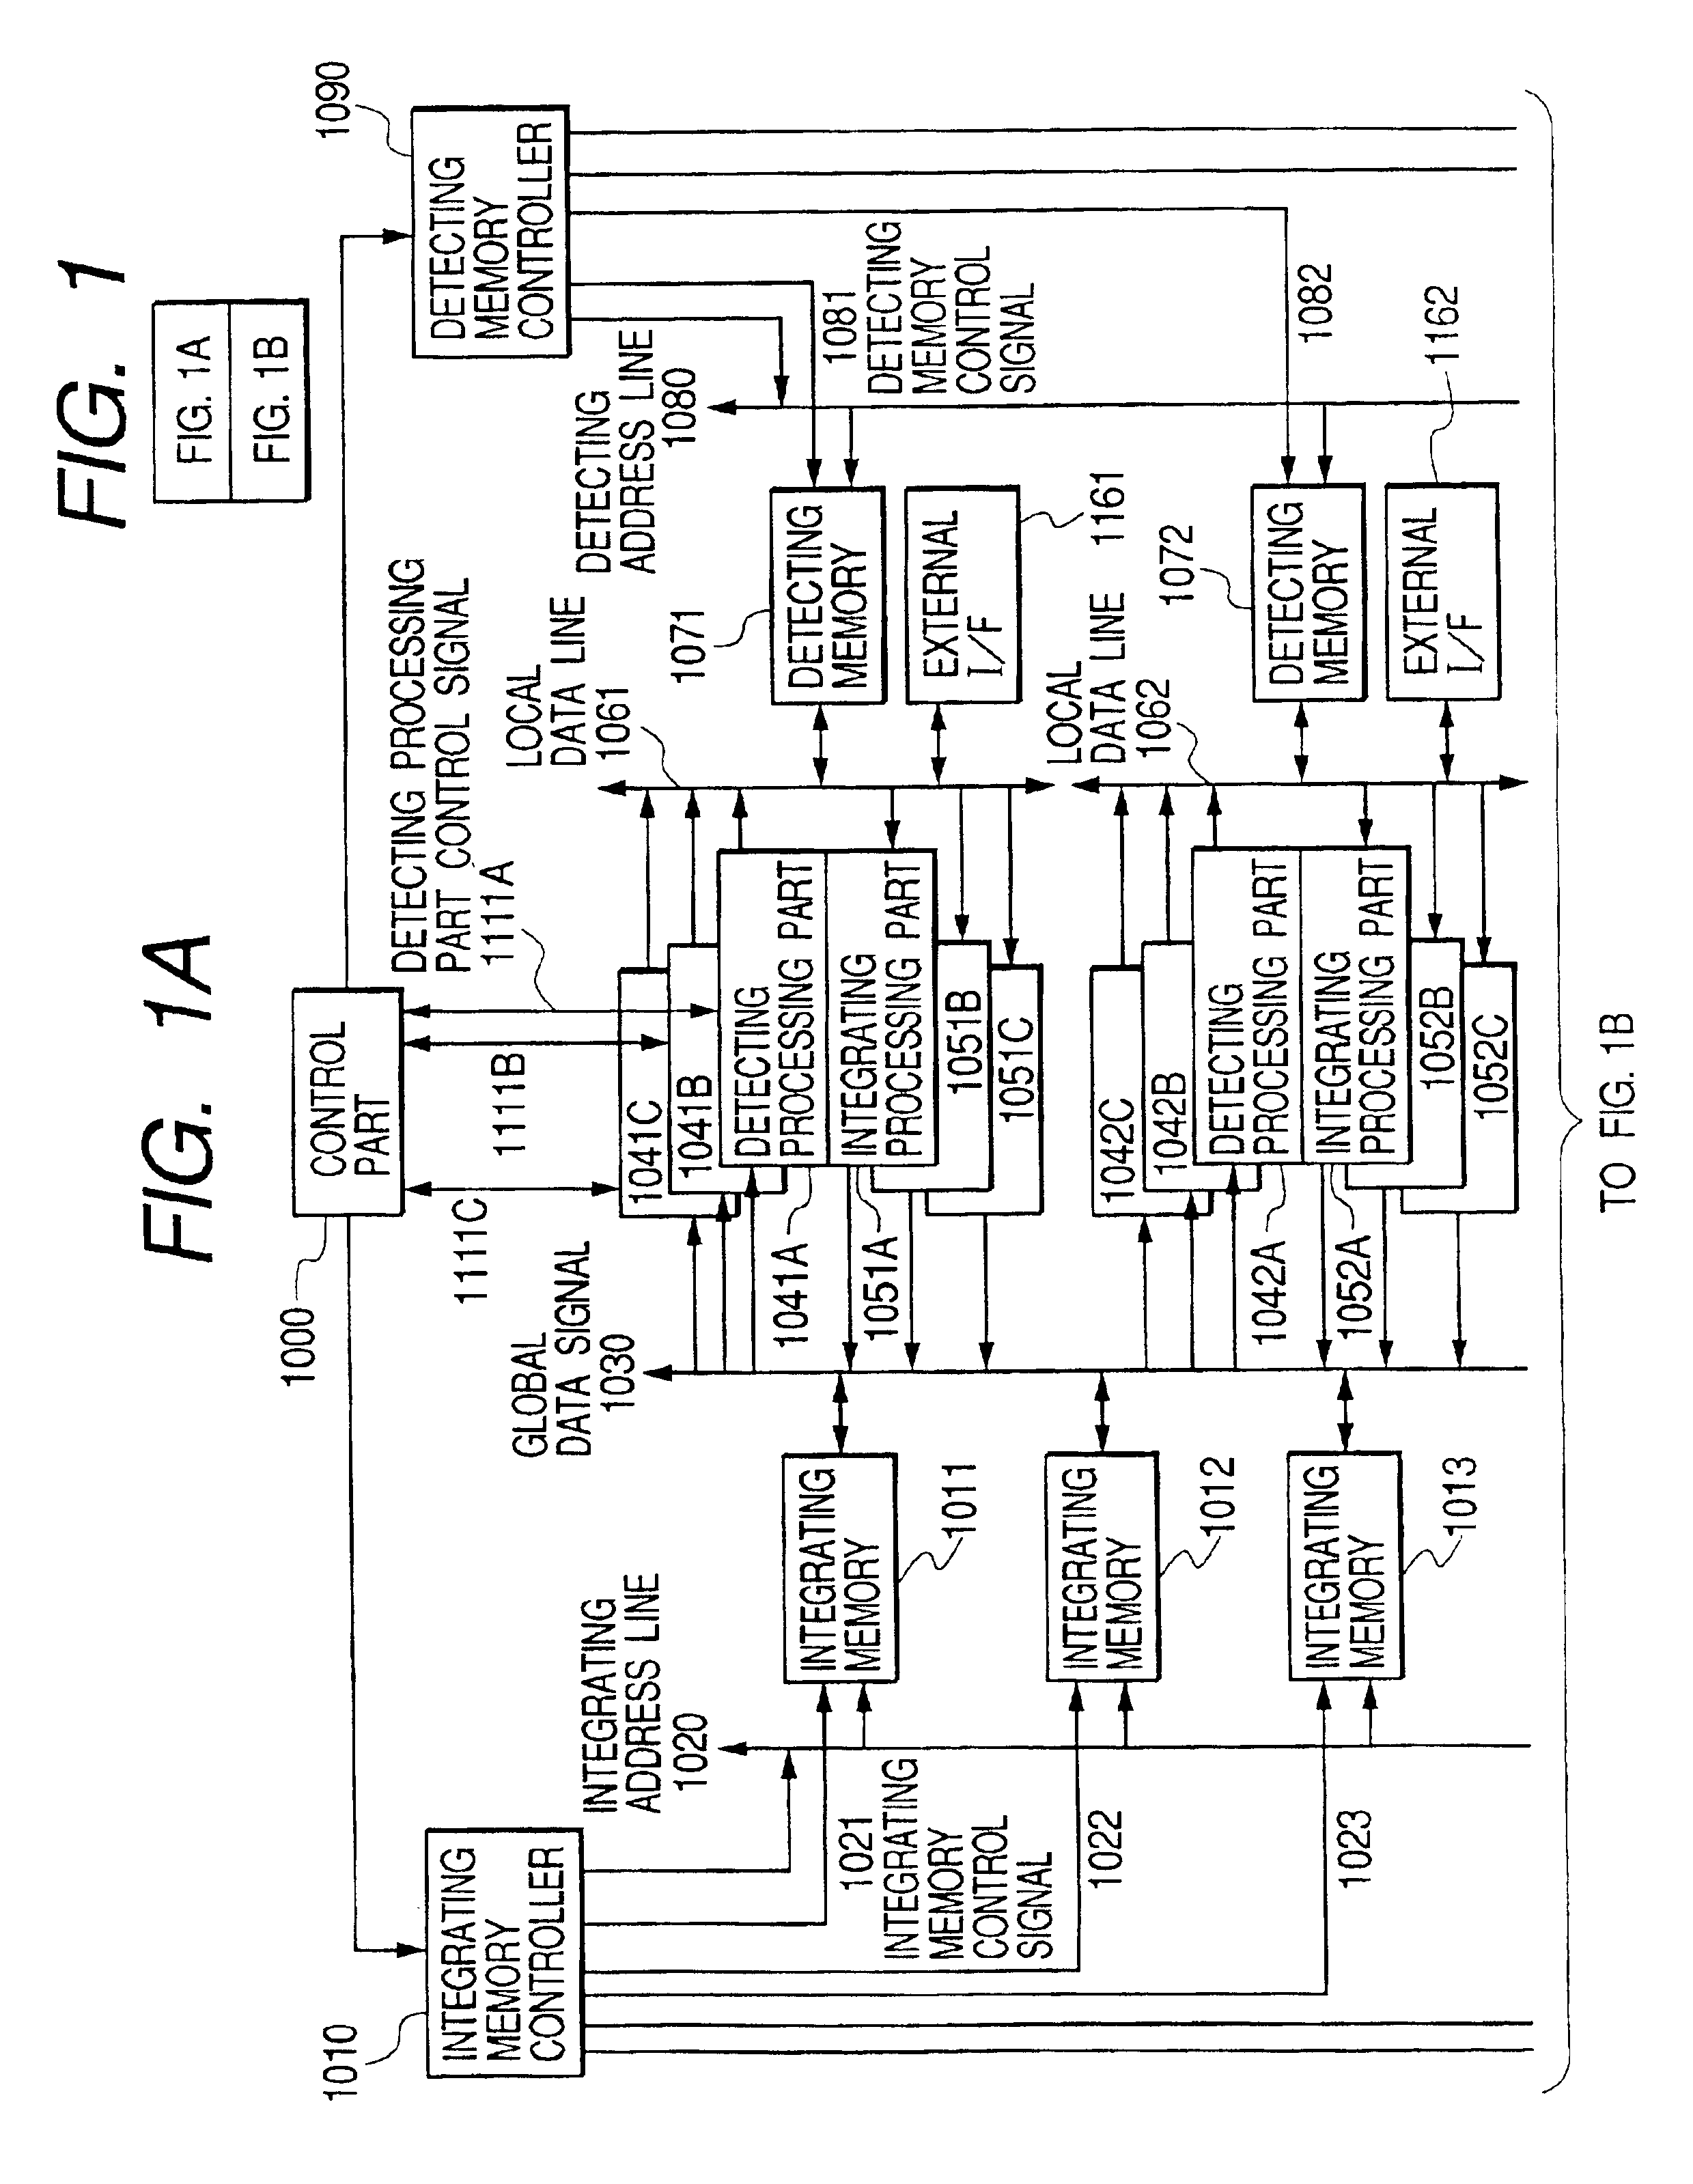 Pattern recognition apparatus for detecting predetermined pattern contained in input signal